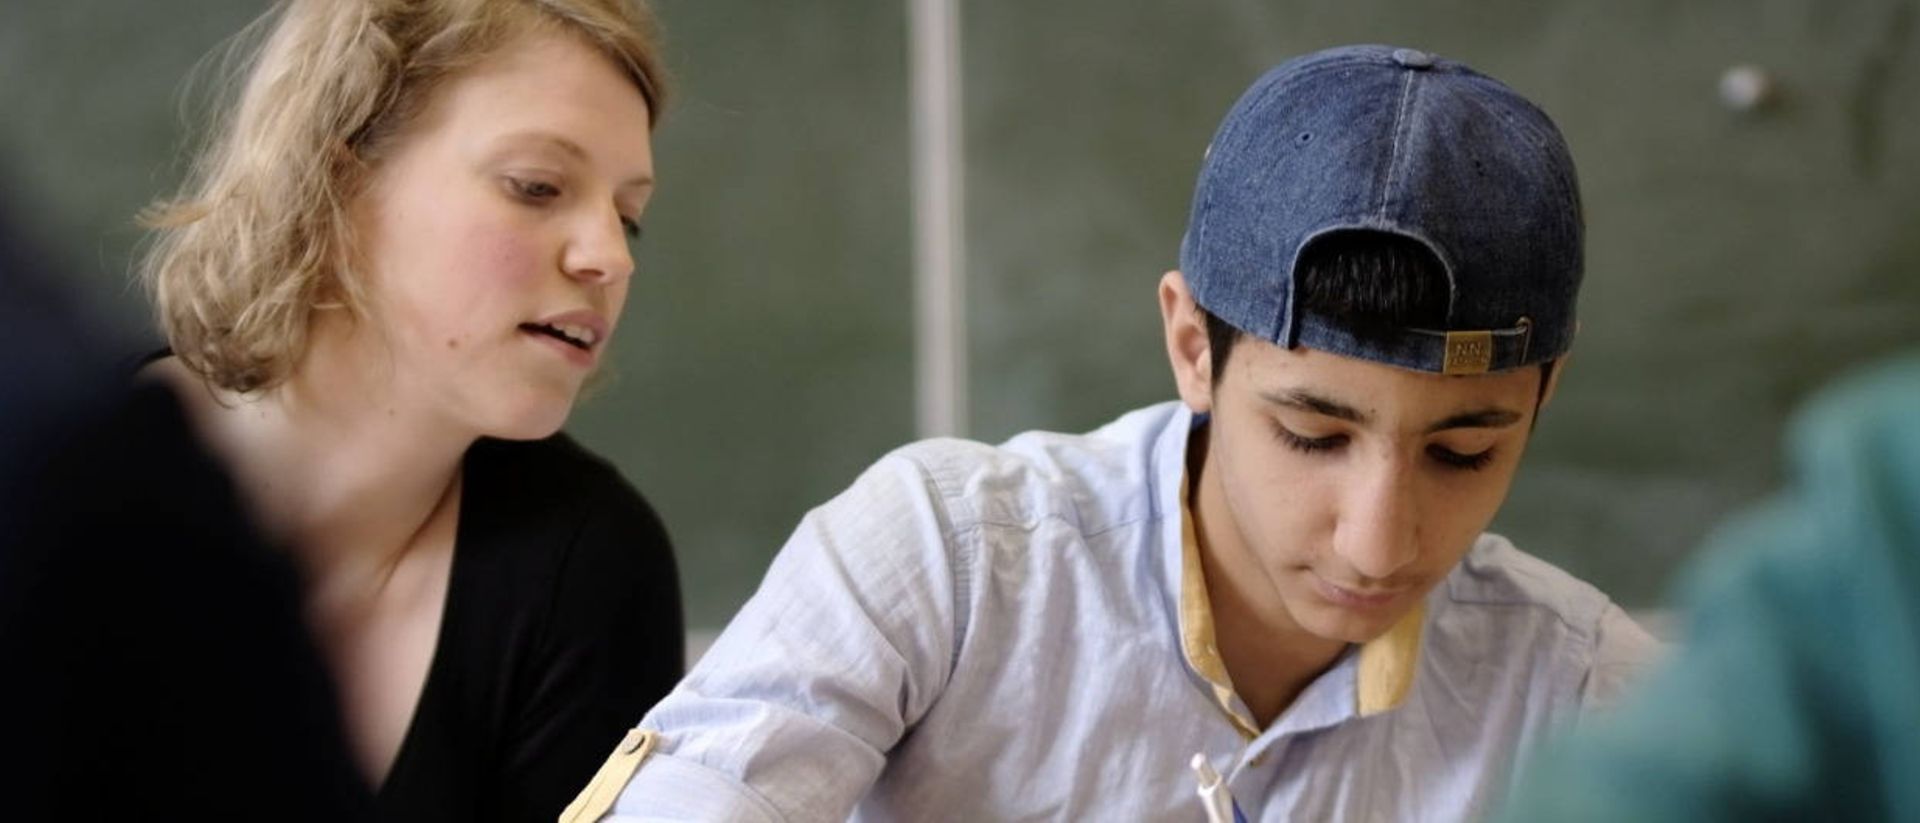 A college graduate helps a student with his assignments.